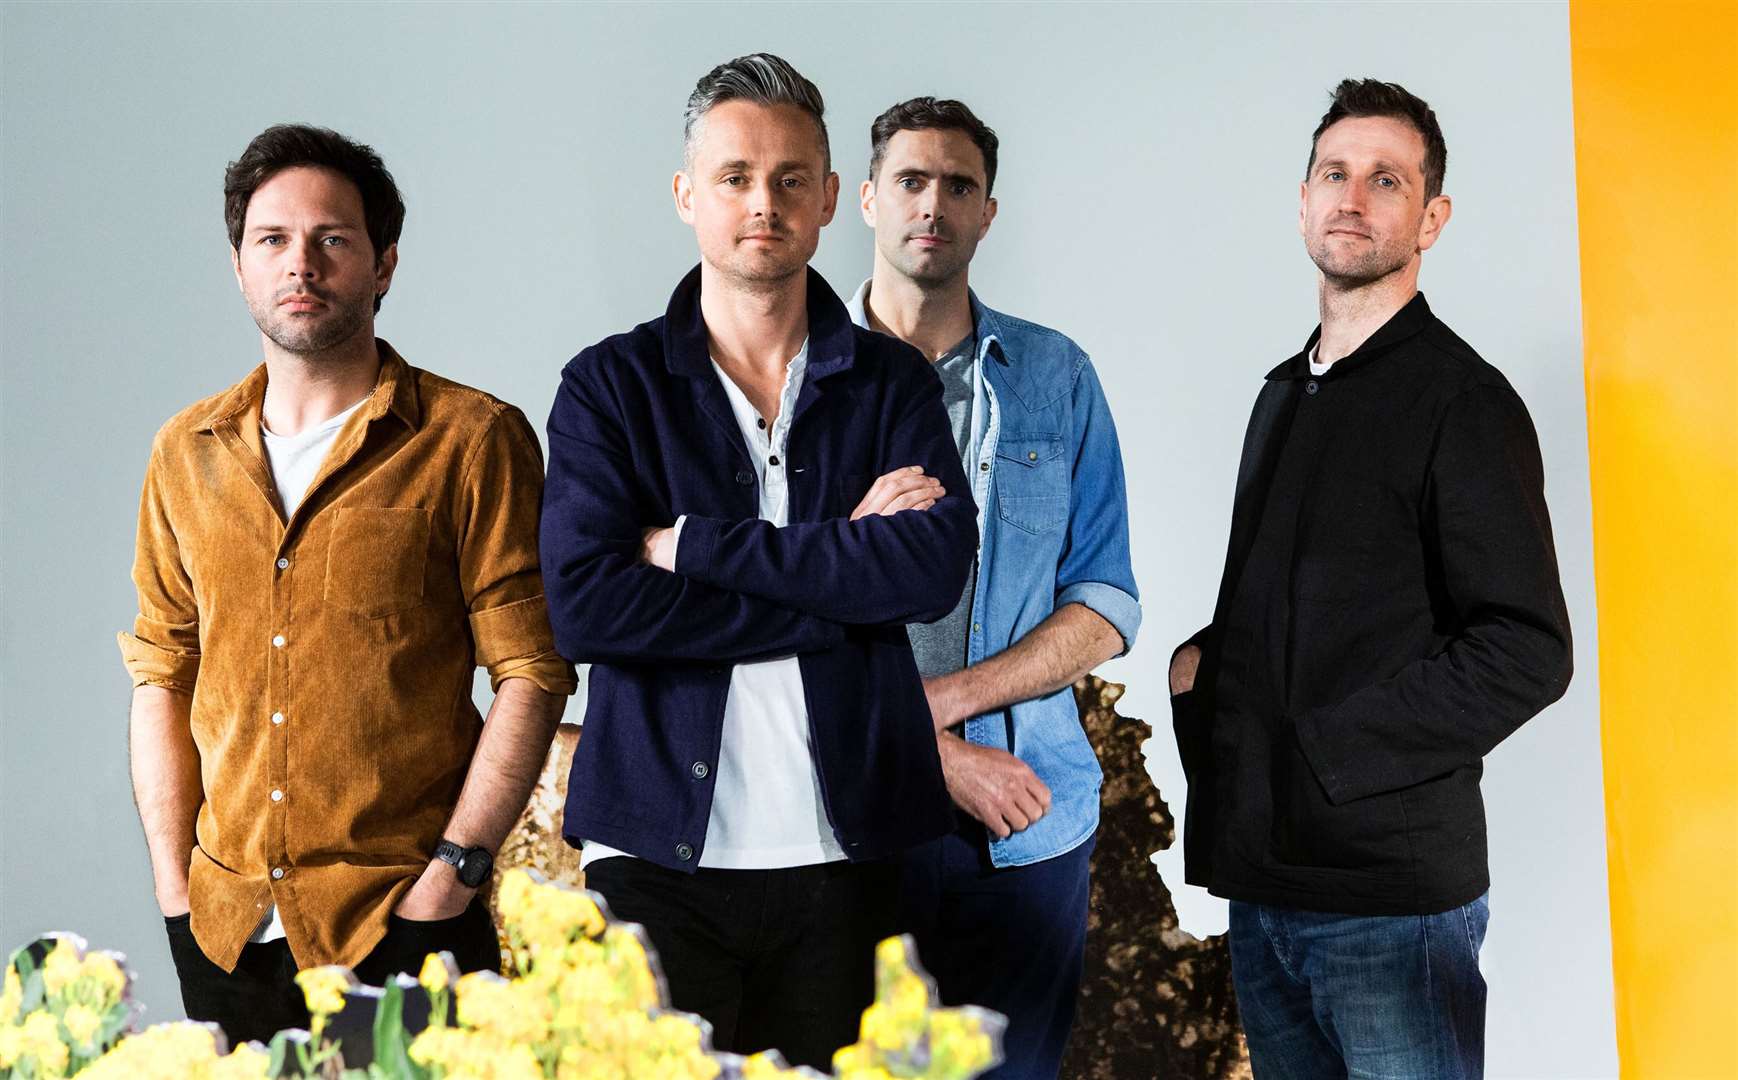 Keane are on the line-up for the Kent drive-in garden party